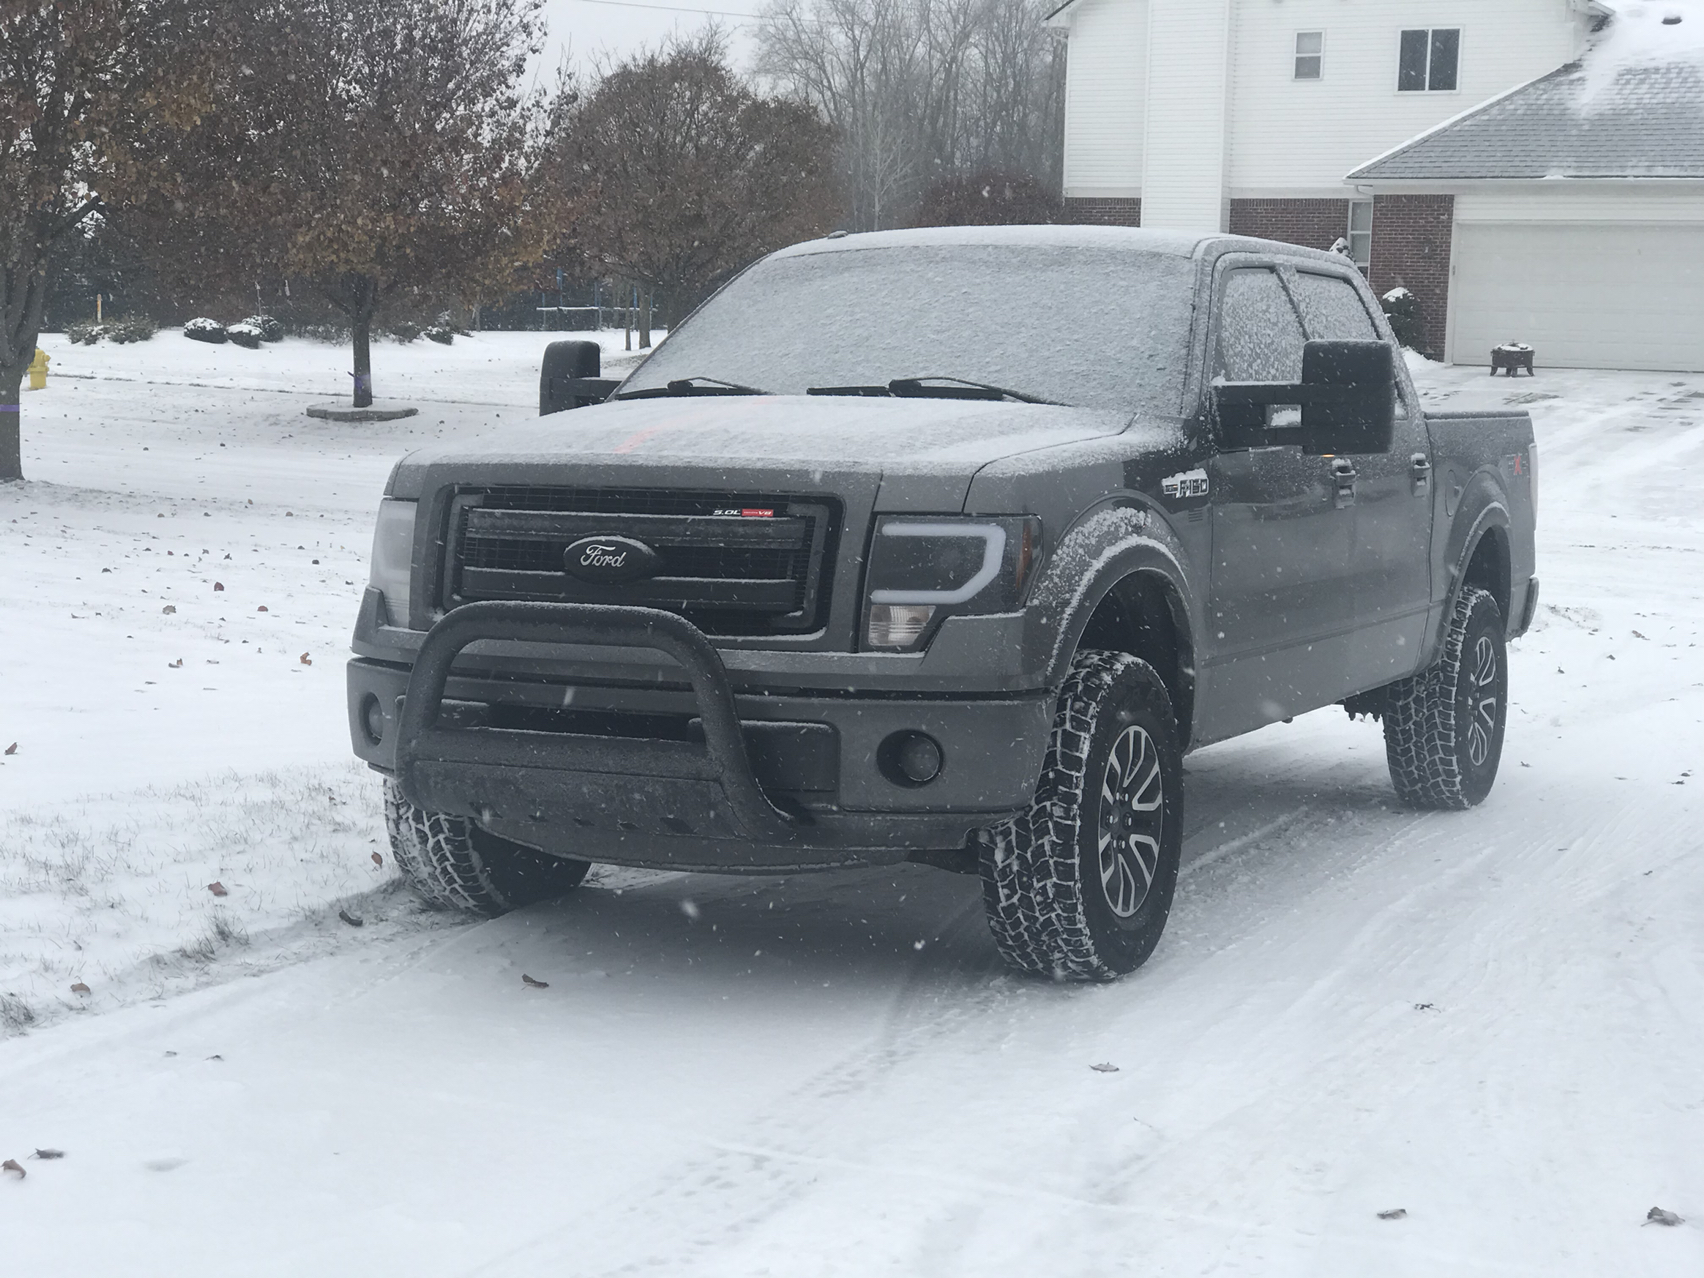 Pics of your truck in the snow - Page 224 - Ford F150 Forum - Community ...